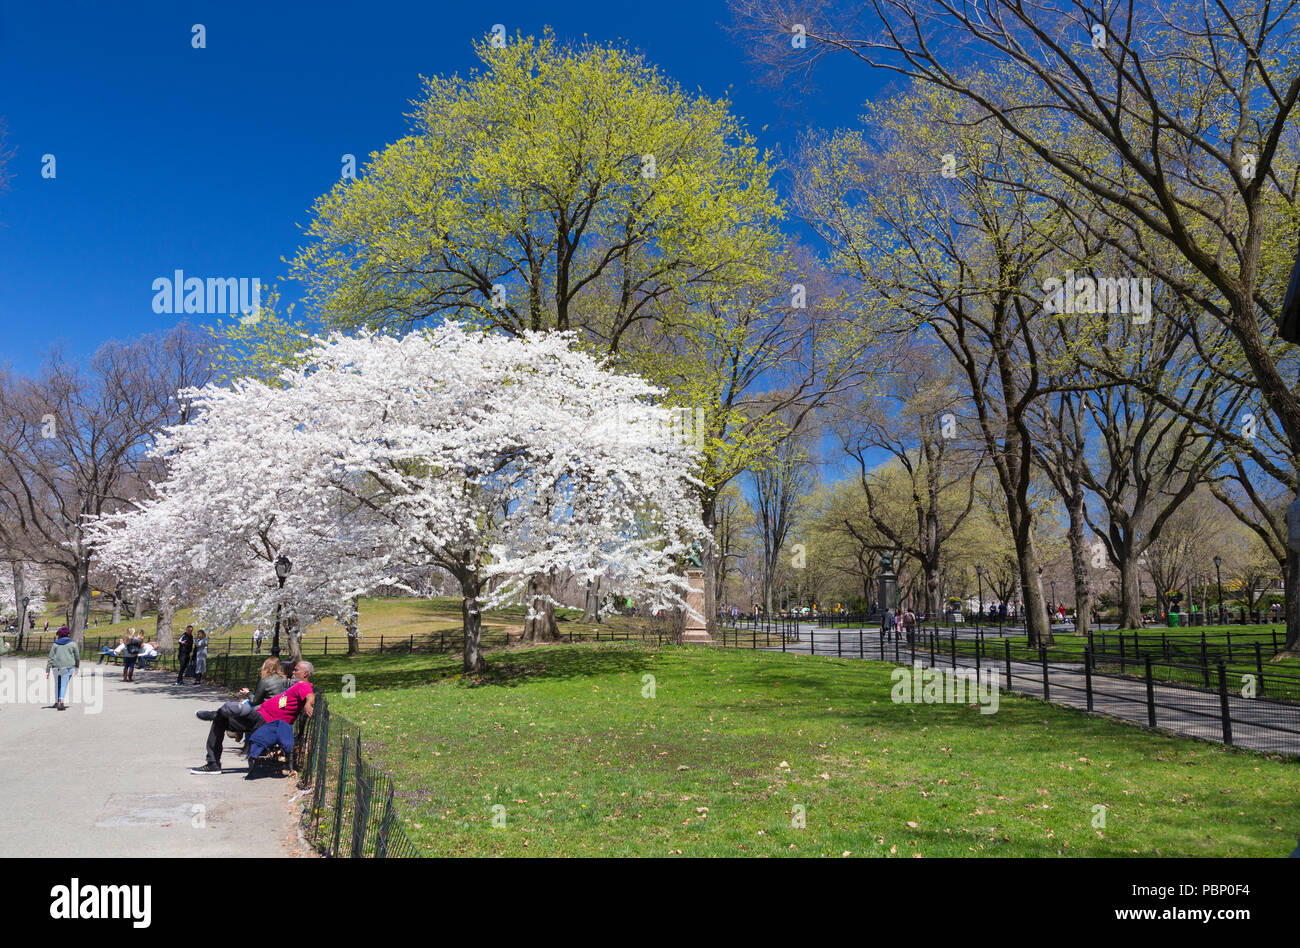 Relaxing in Central Park, New York, USA Stock Photo